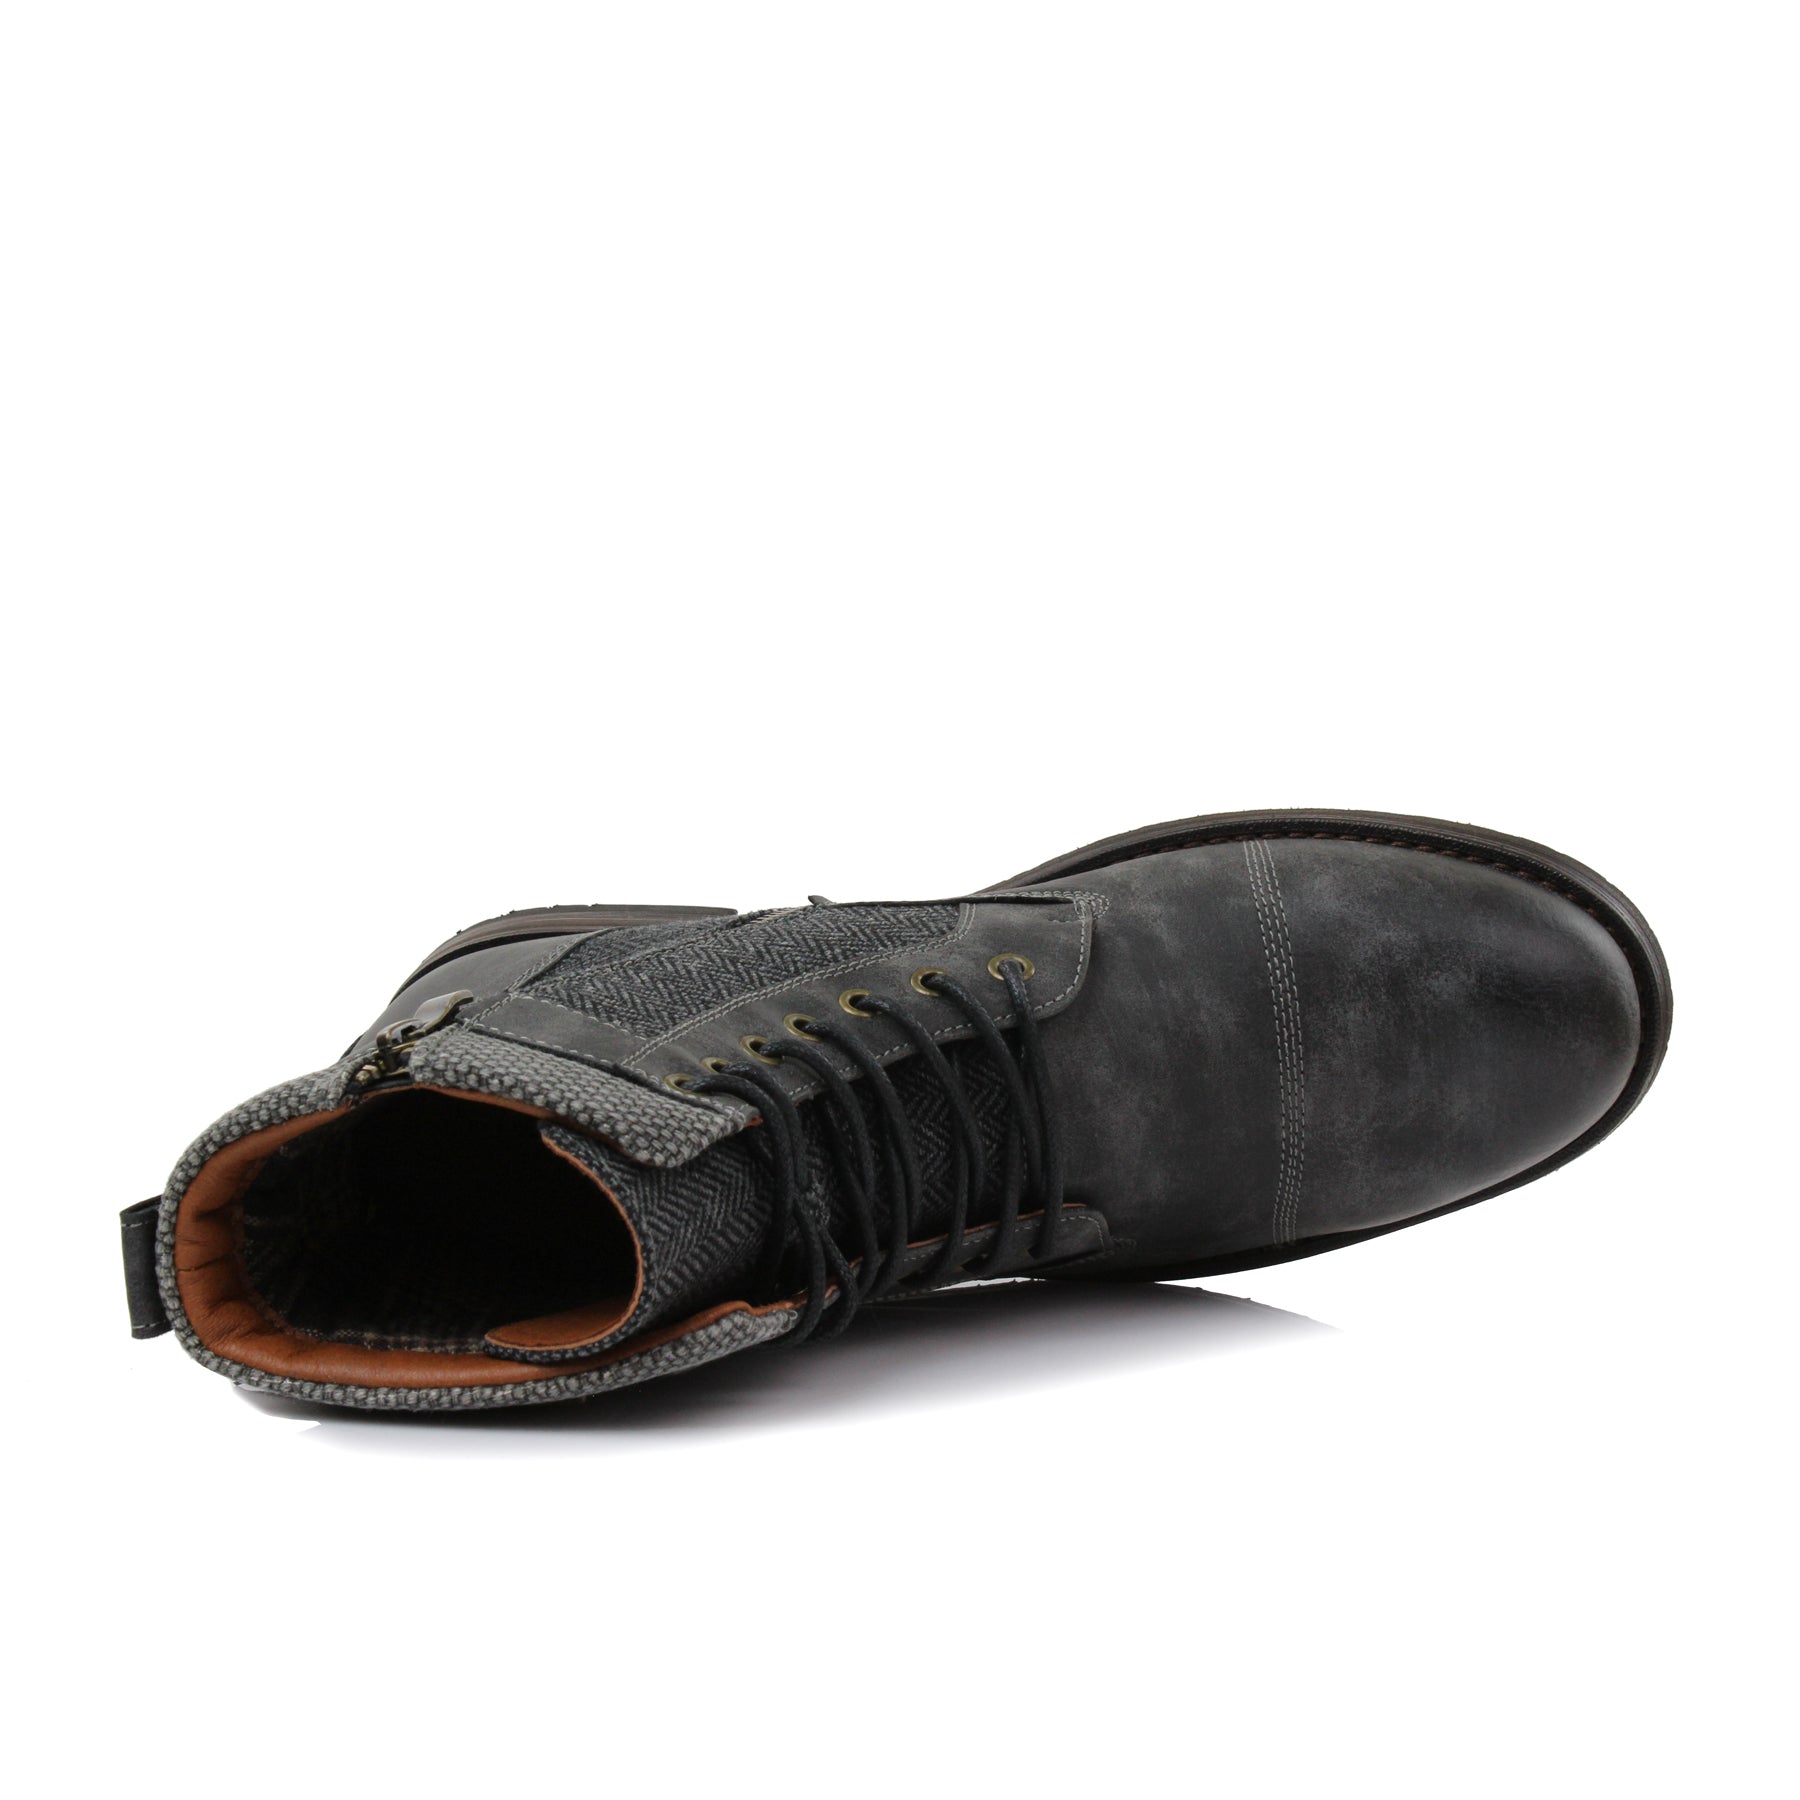 Rugged Duo-Textured Boots | Elijah by Polar Fox | Conal Footwear | Top-Down Angle View